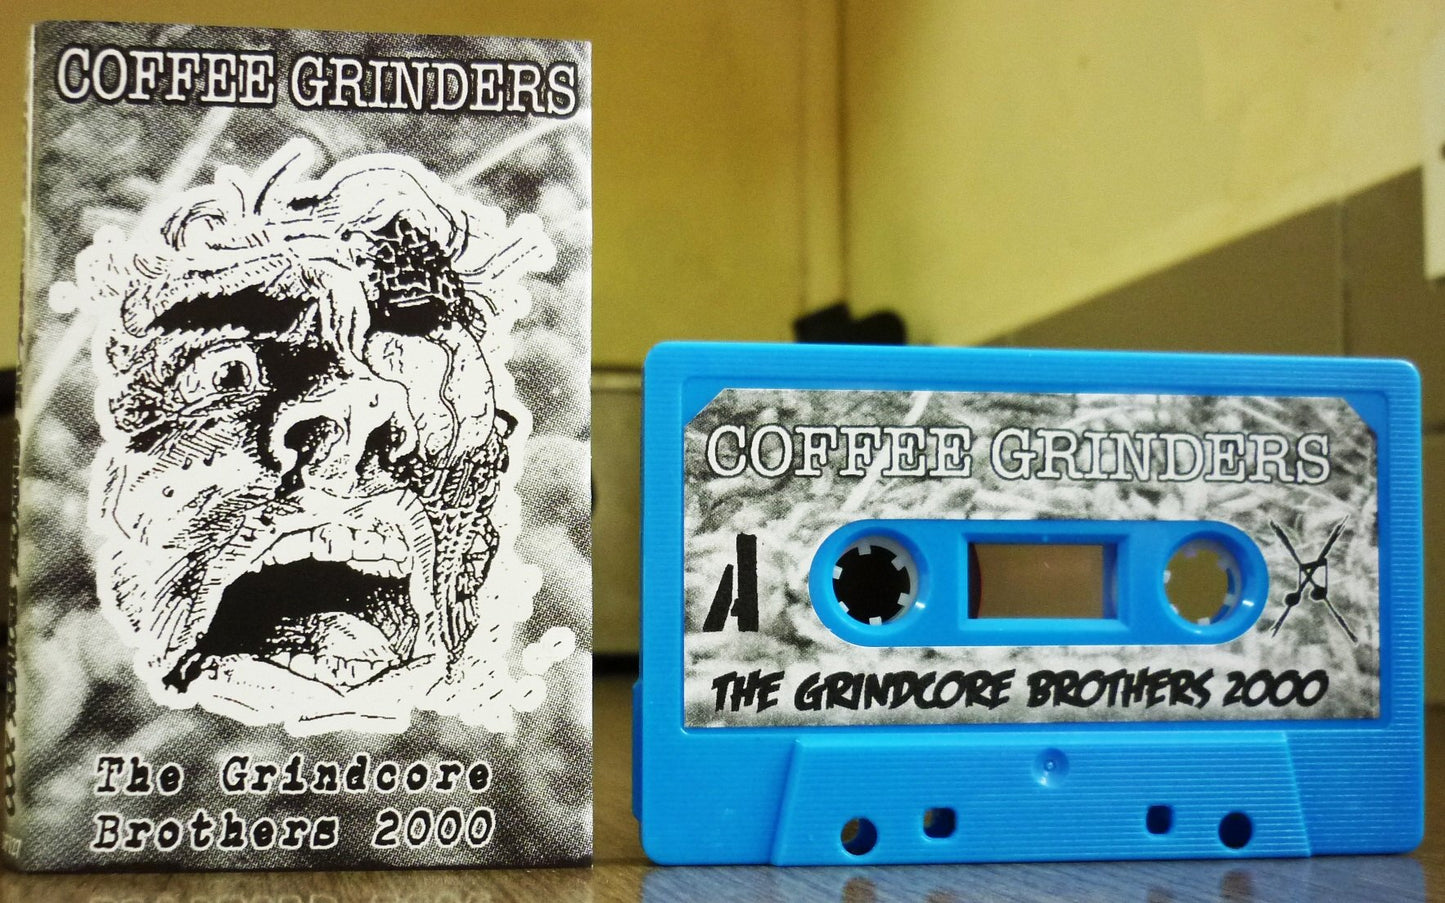 COFFEE GRINDERS - The Grindcore Brothers 2000 Tape